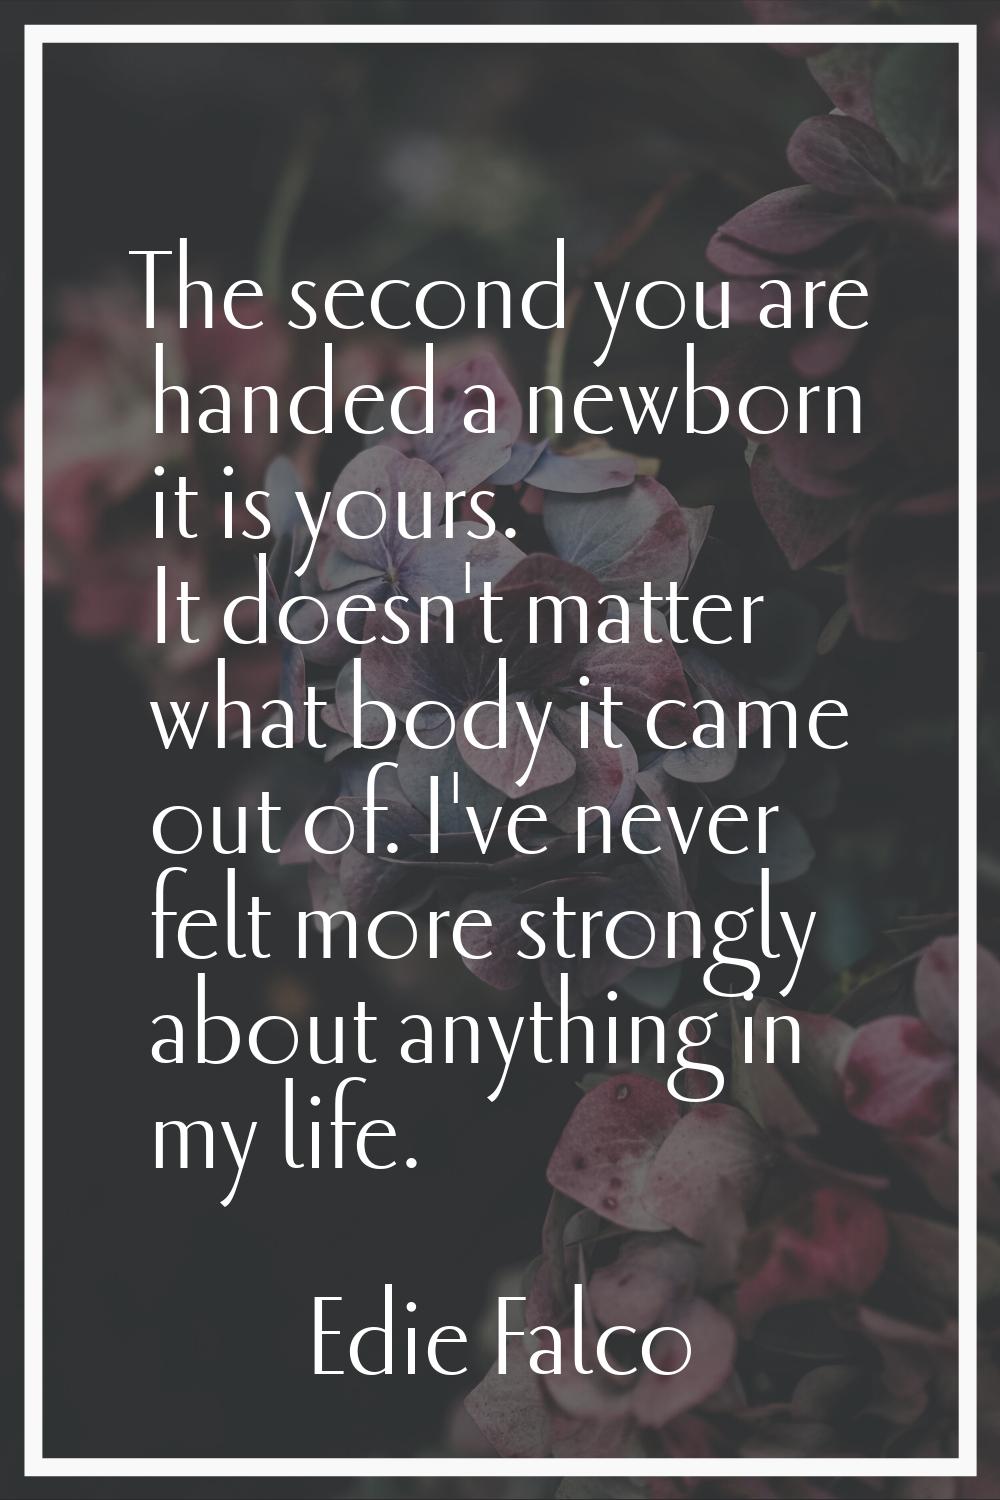 The second you are handed a newborn it is yours. It doesn't matter what body it came out of. I've n